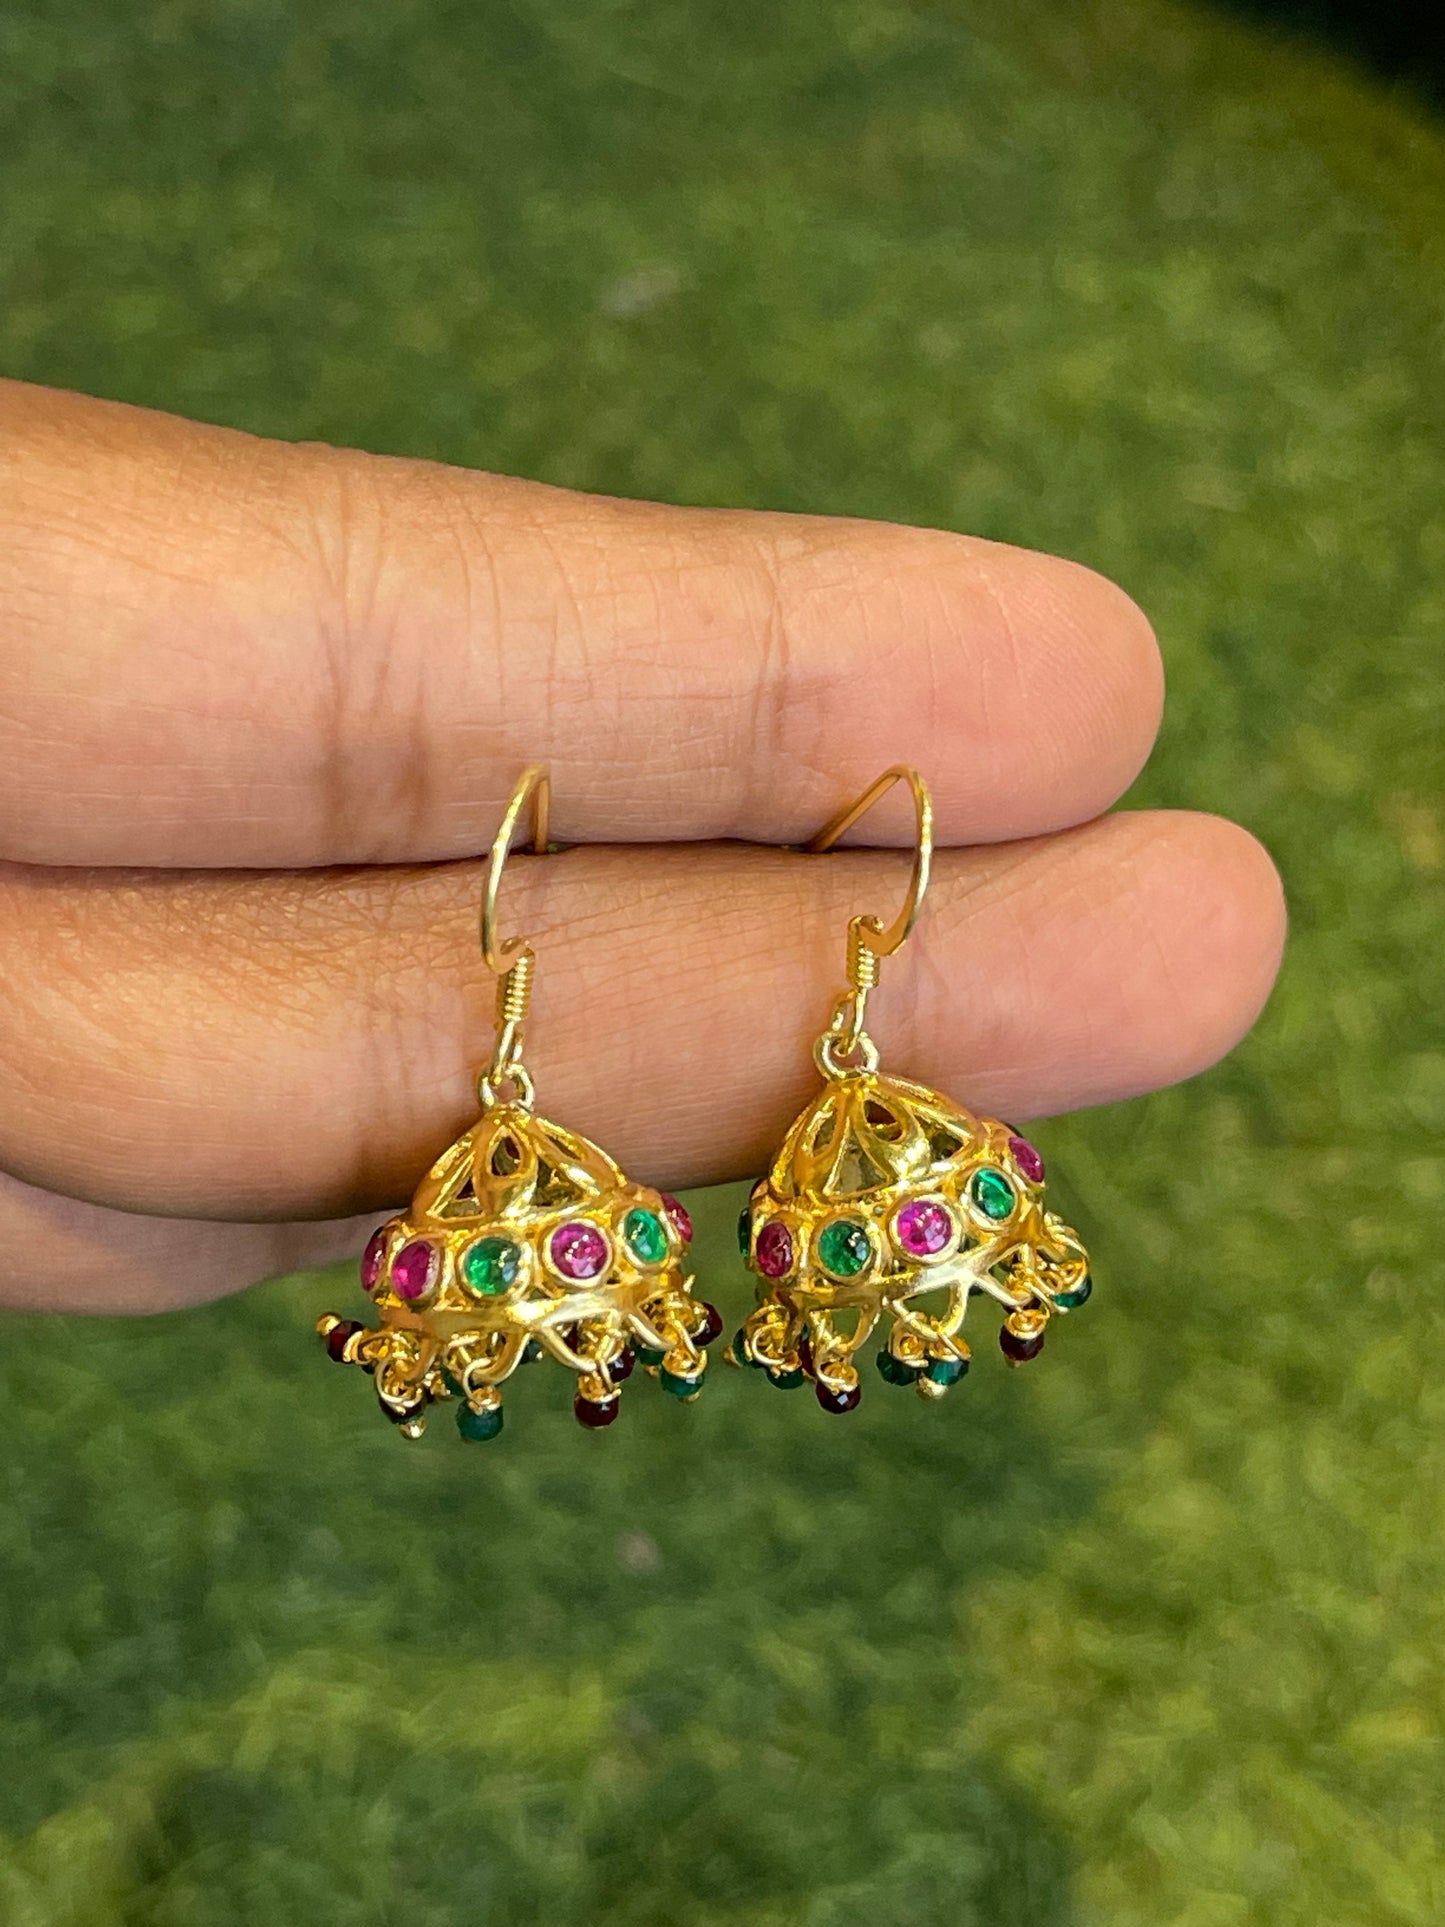 Gold polish jhumkis with pink and green stones in 92.5 sterling silver hooks earrings